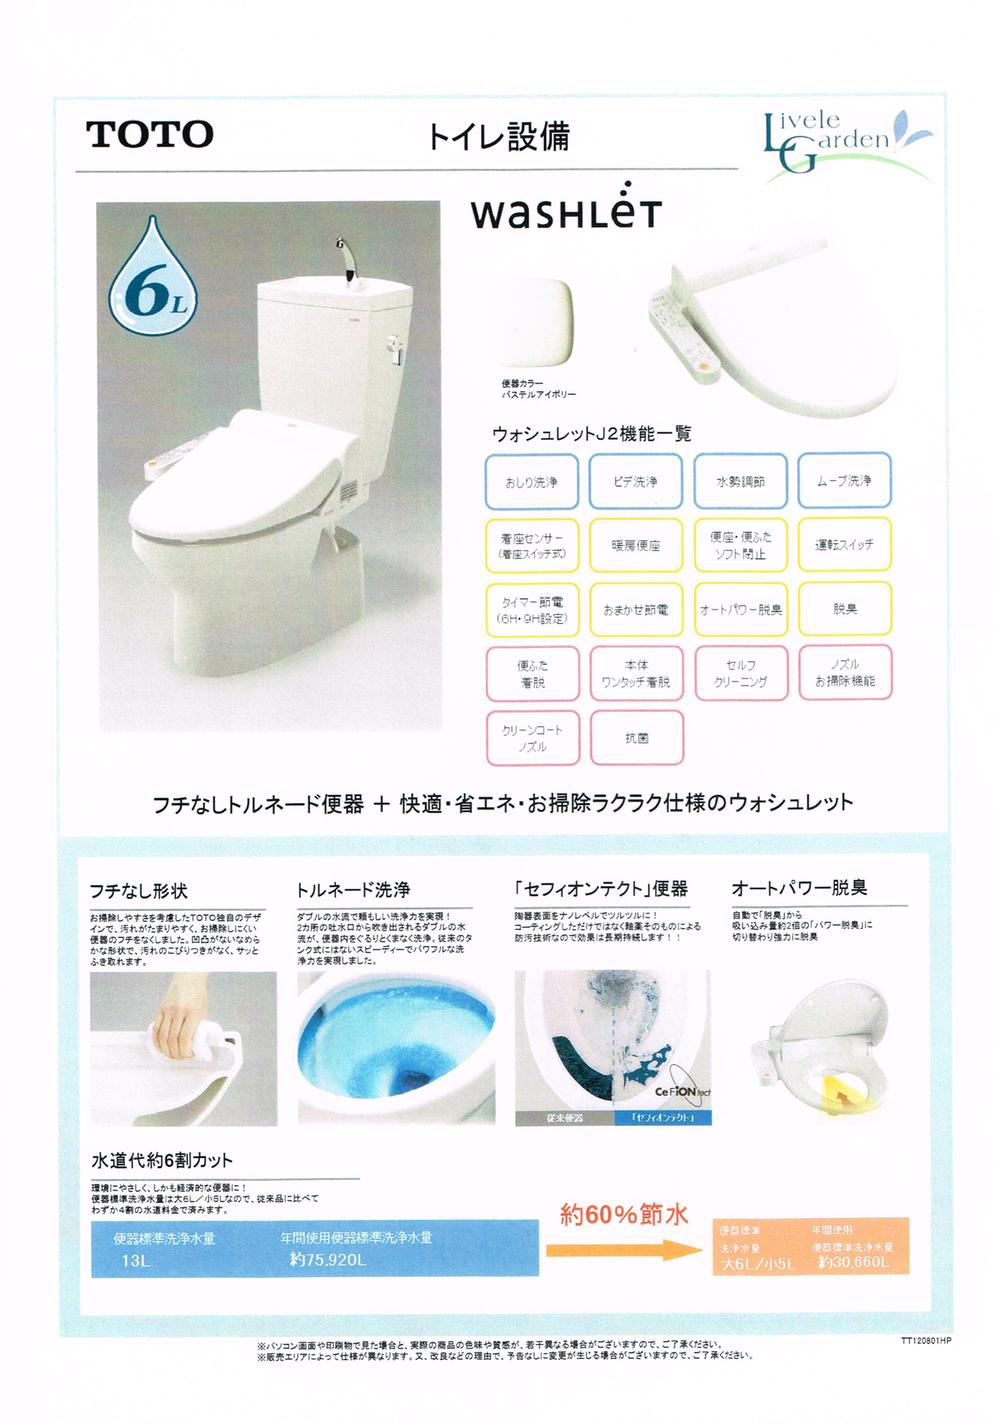 Toilet. Specification example